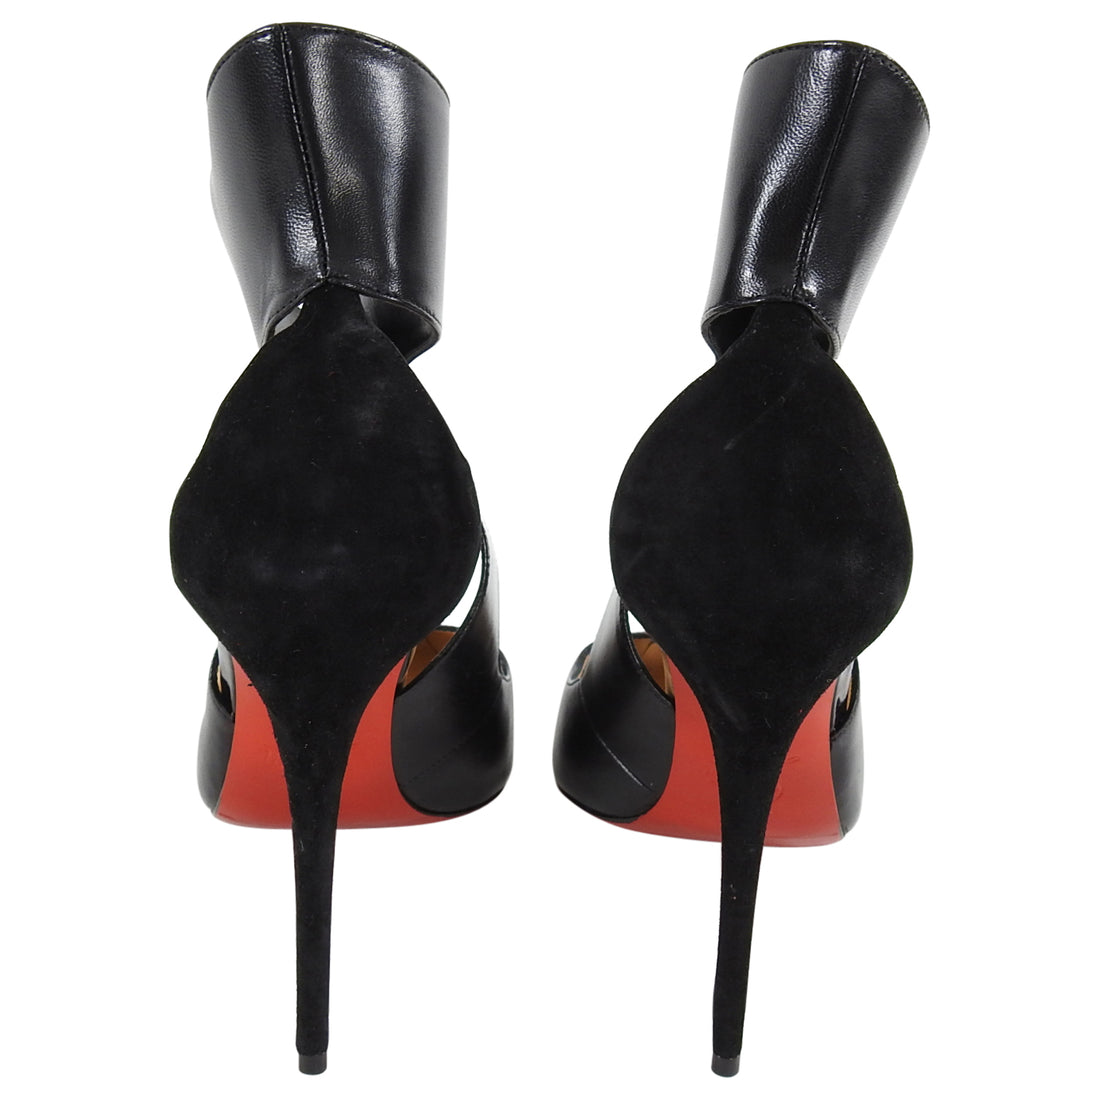 Christian Louboutin Black Ferme Rouge 115 High Heel Lace Front Shoes - 40